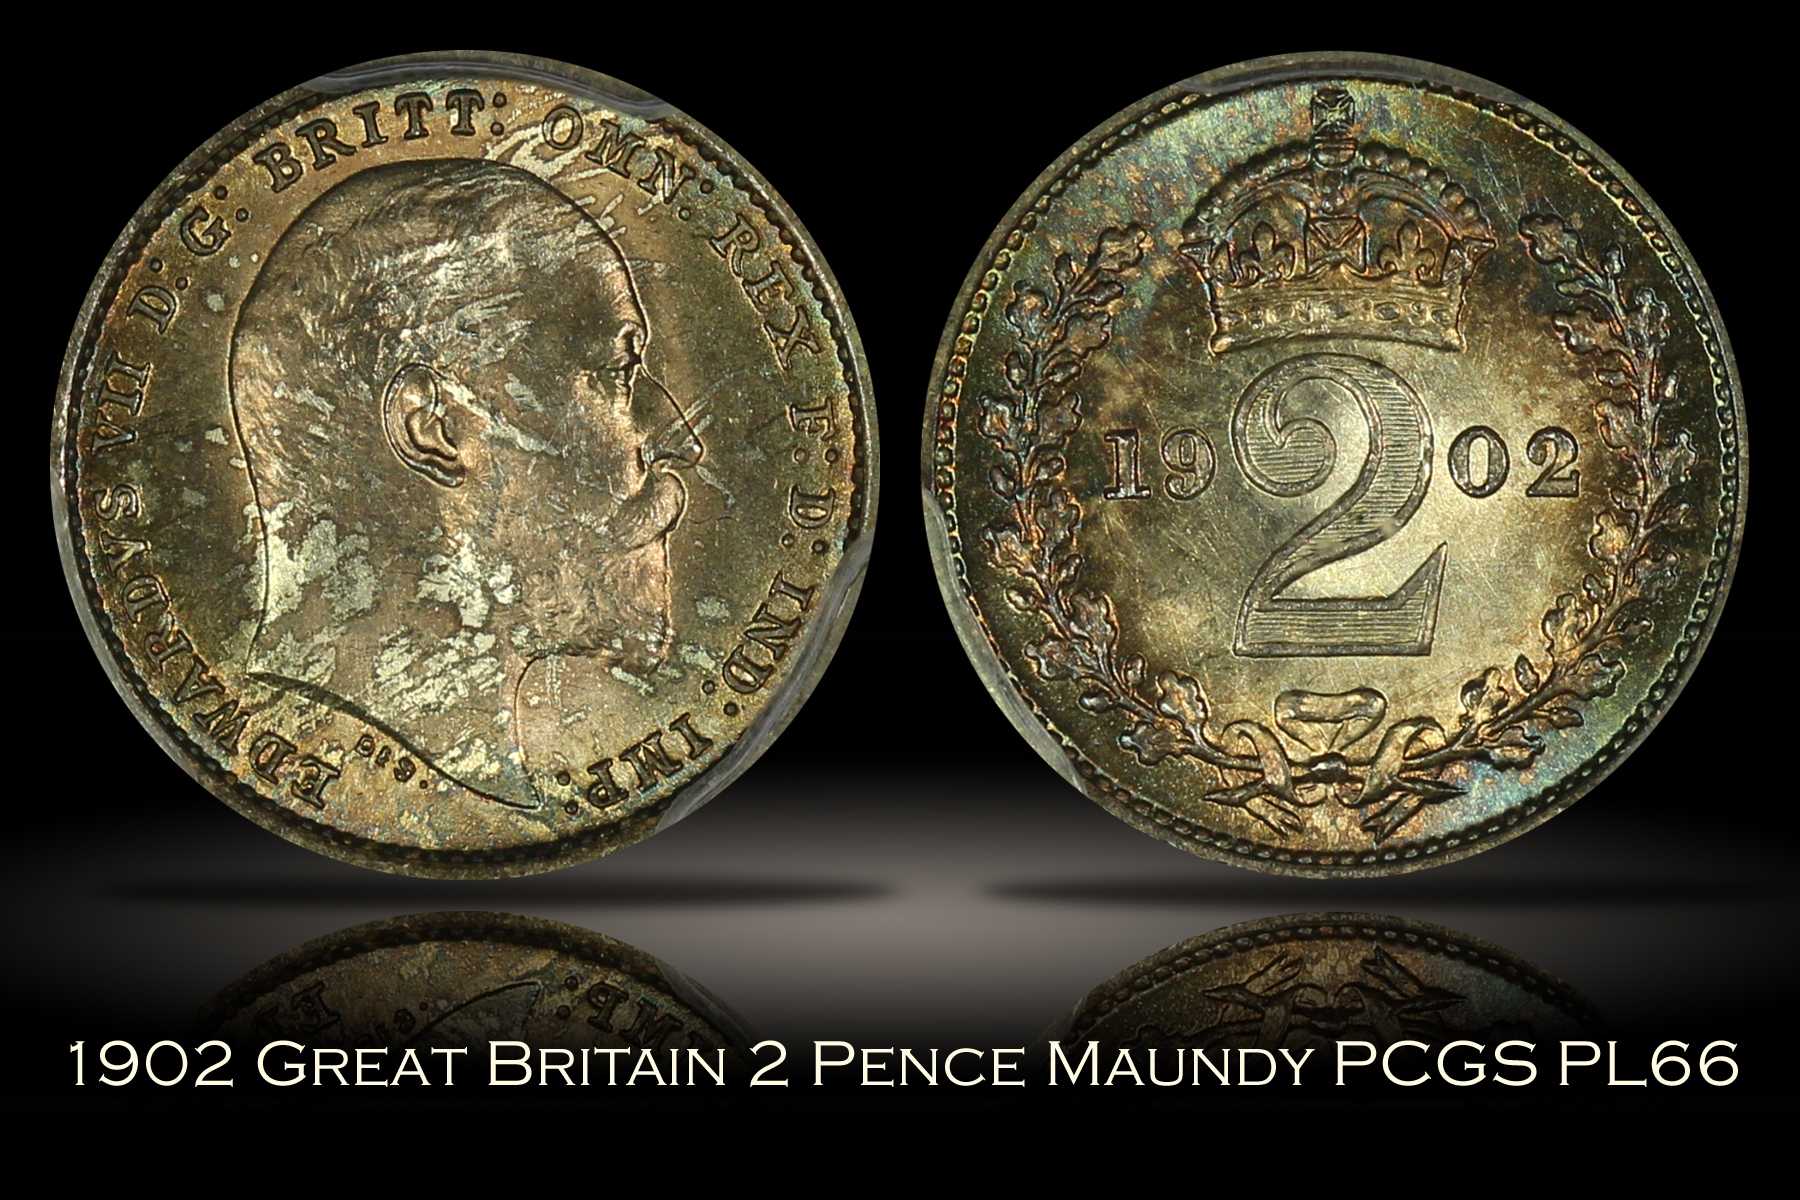 1902 Great Britain 2 Pence Maundy PCGS PL66